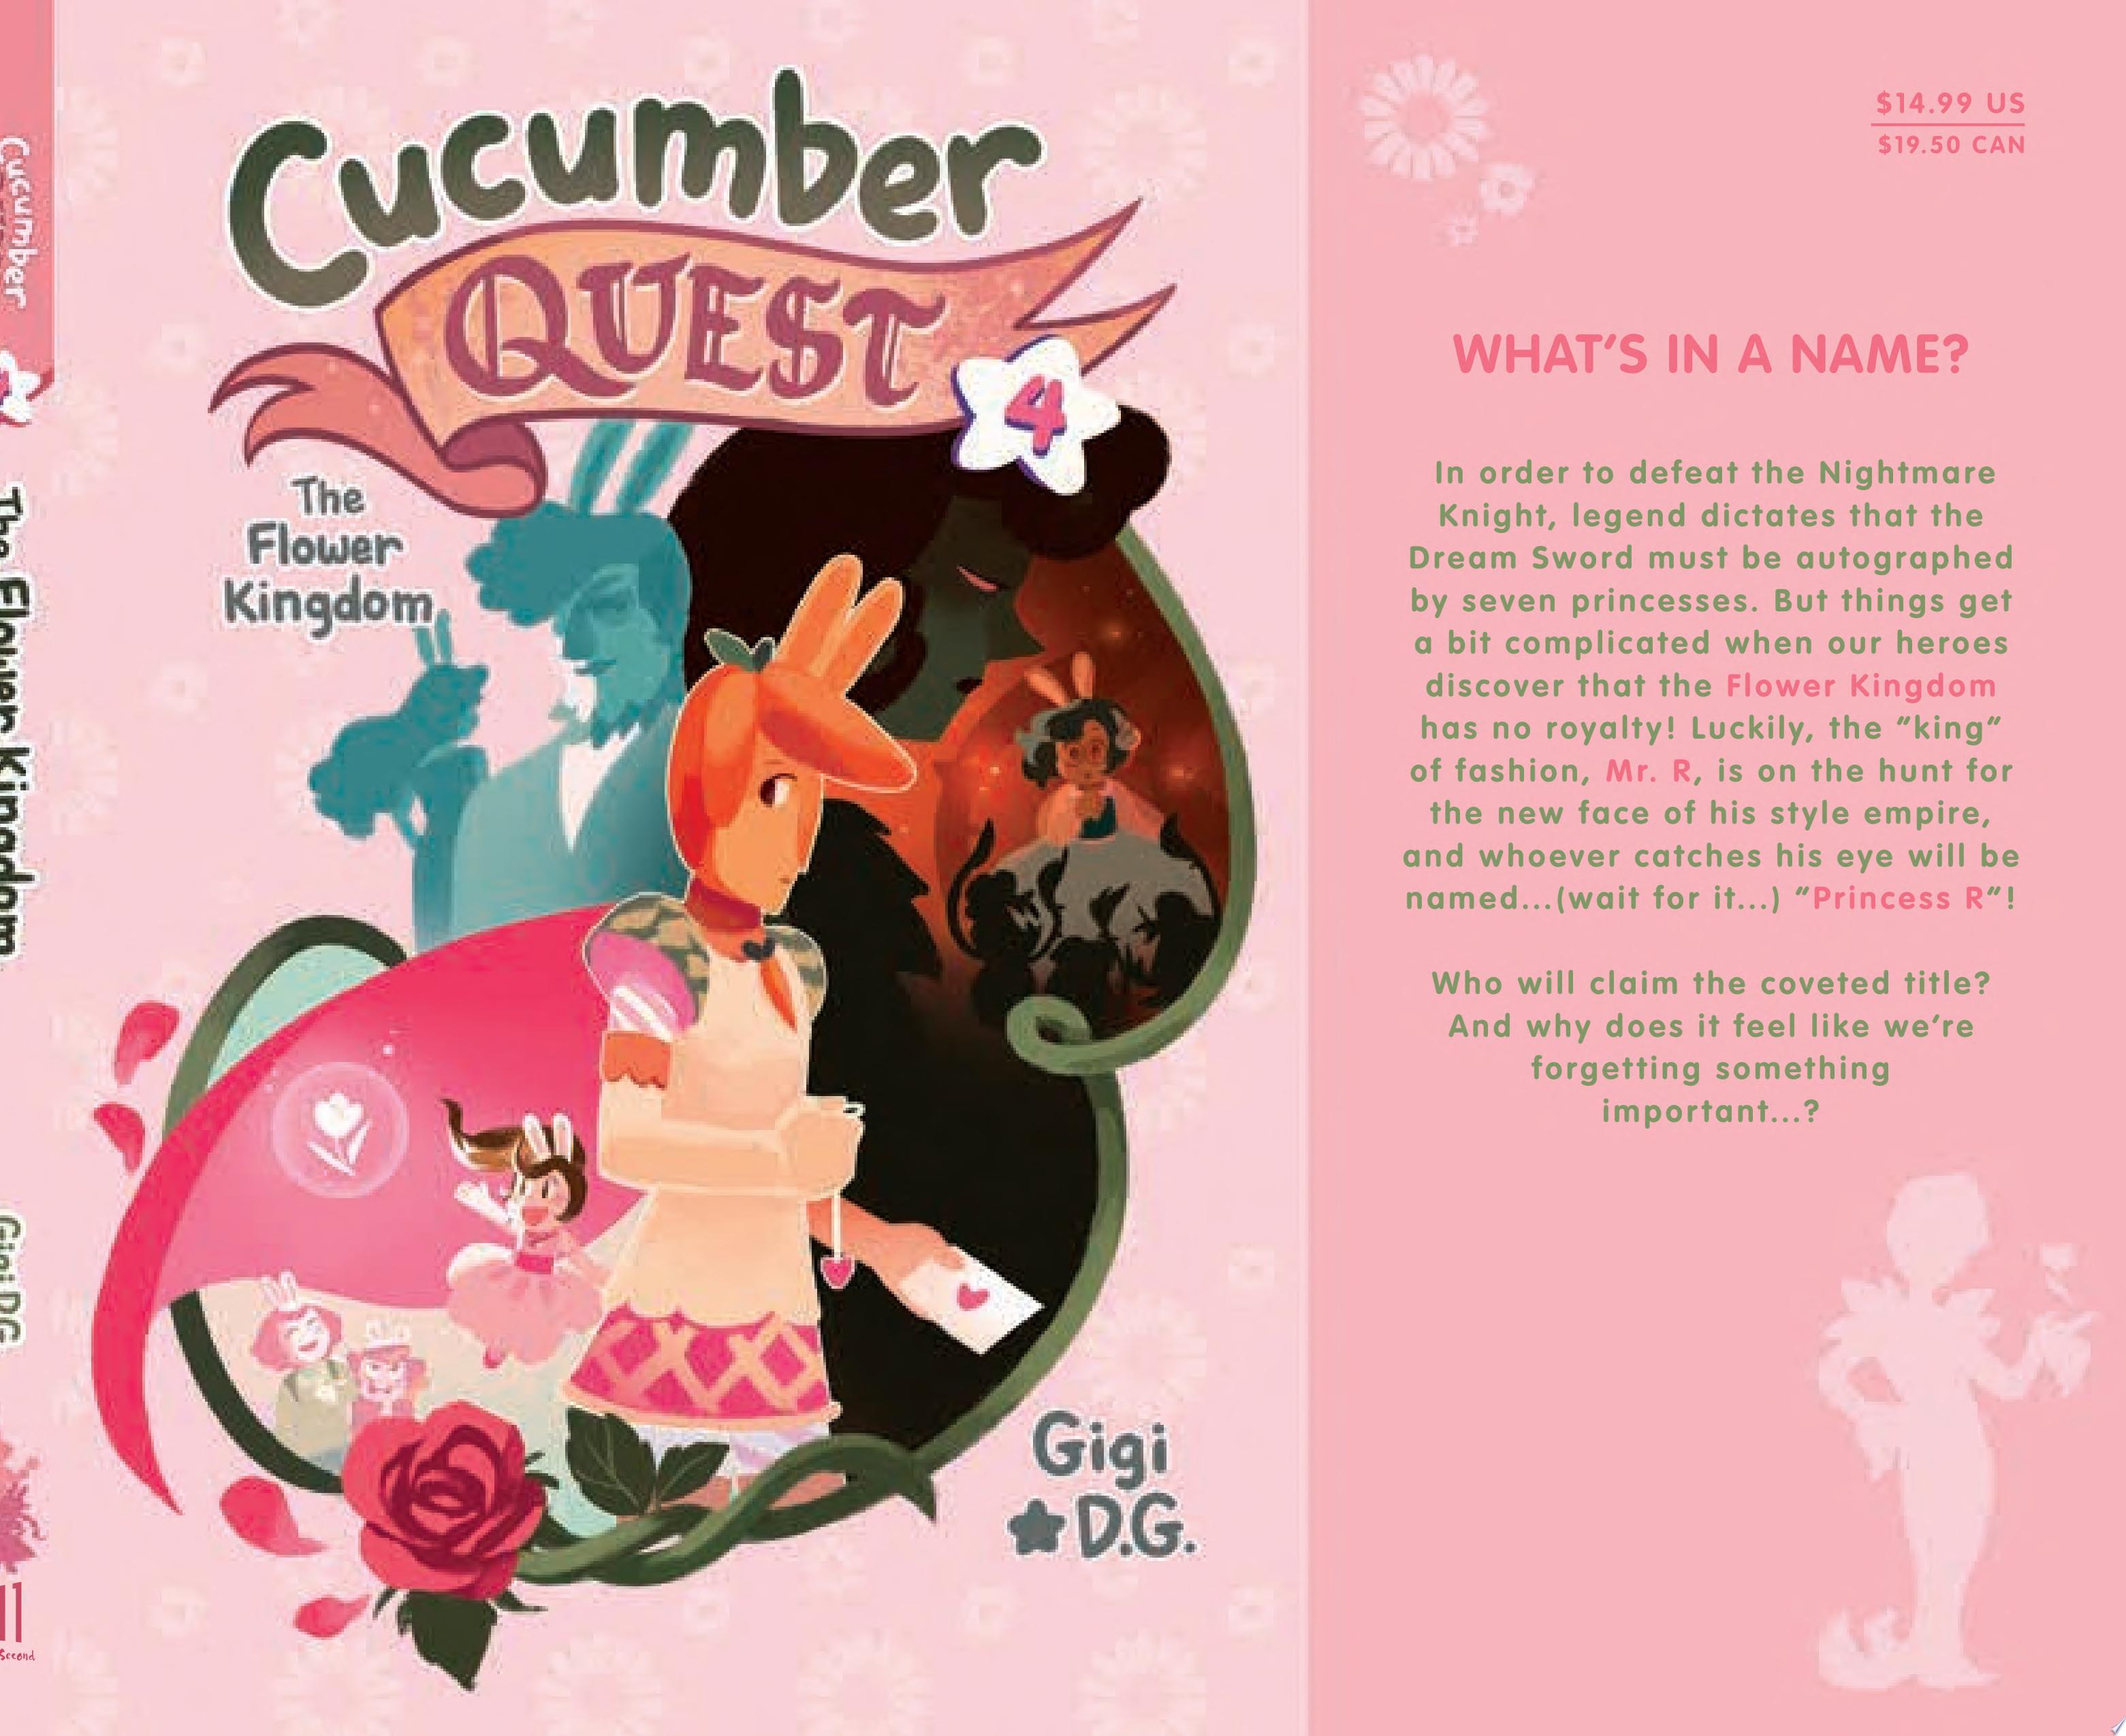 Image for "Cucumber Quest: The Flower Kingdom"